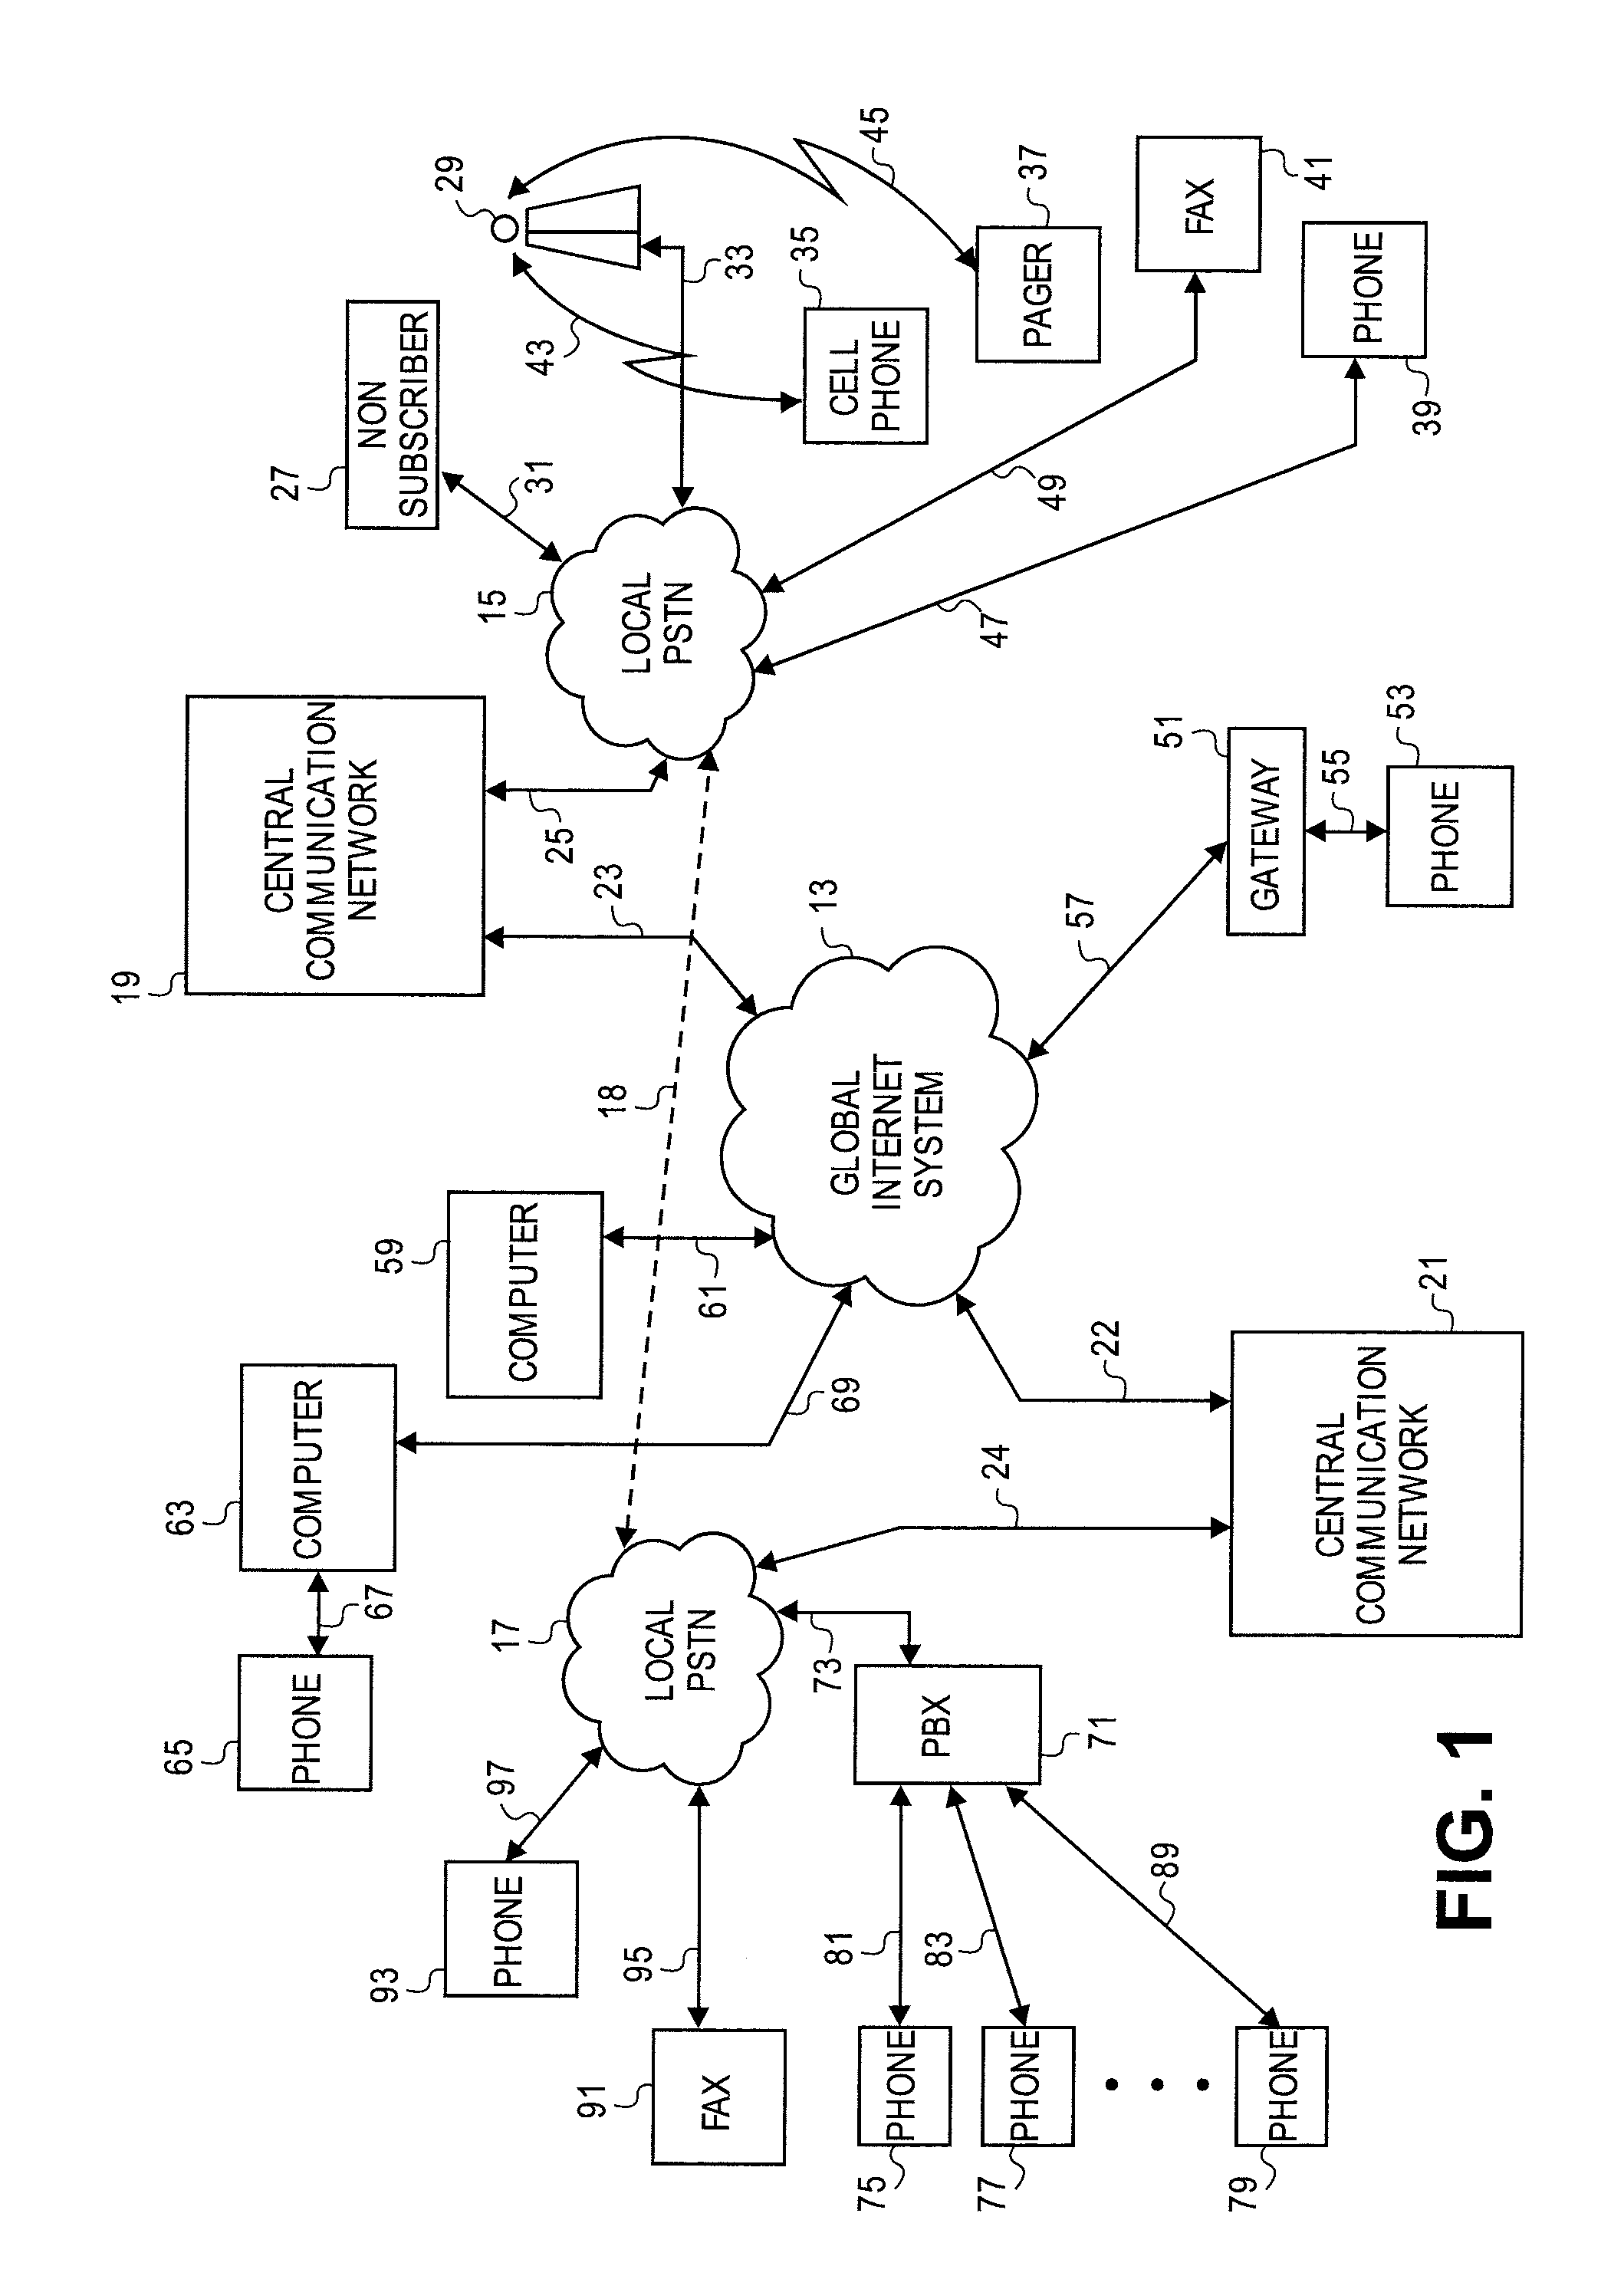 Method and apparatus for interfacing a public switched telephone network and an internet protocol network for multi-media communication